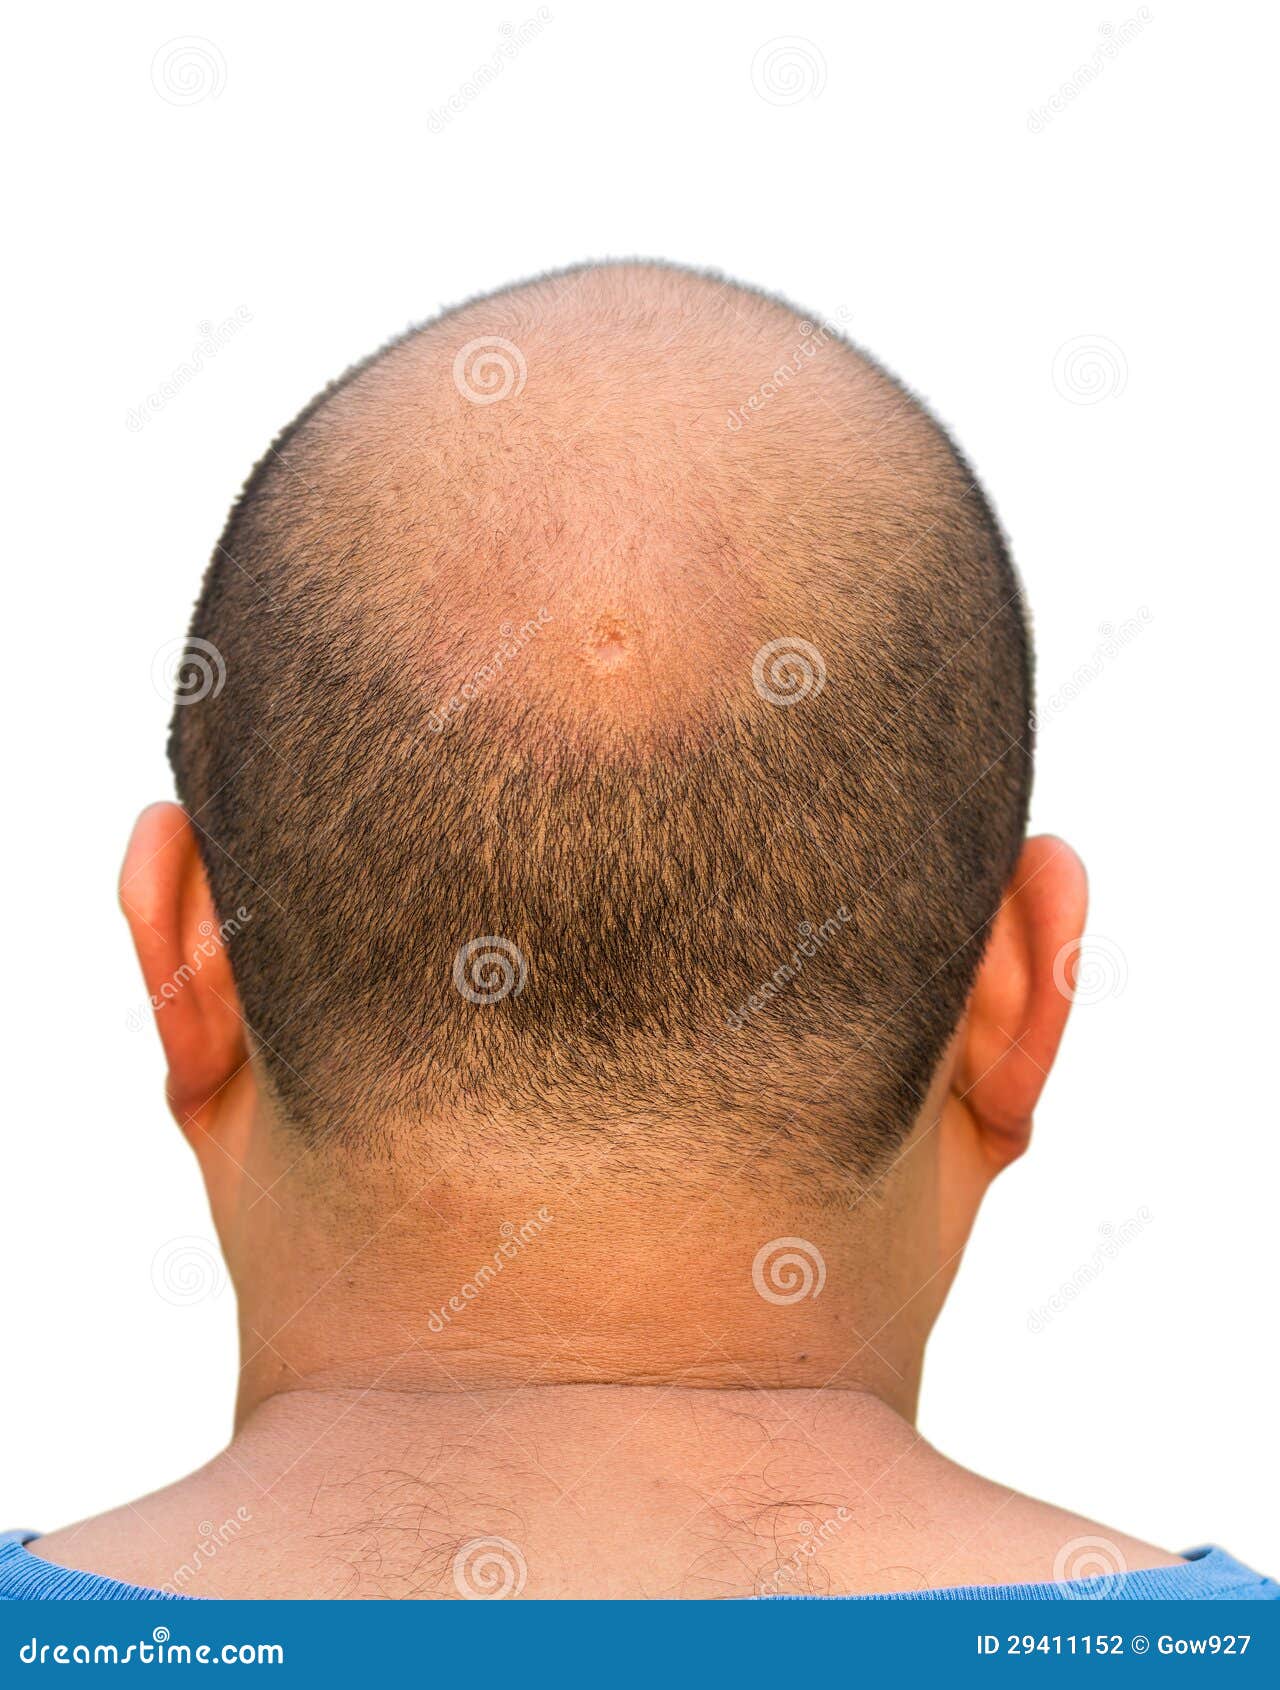 Bald head isolation stock photo. Image of head, crater - 29411152